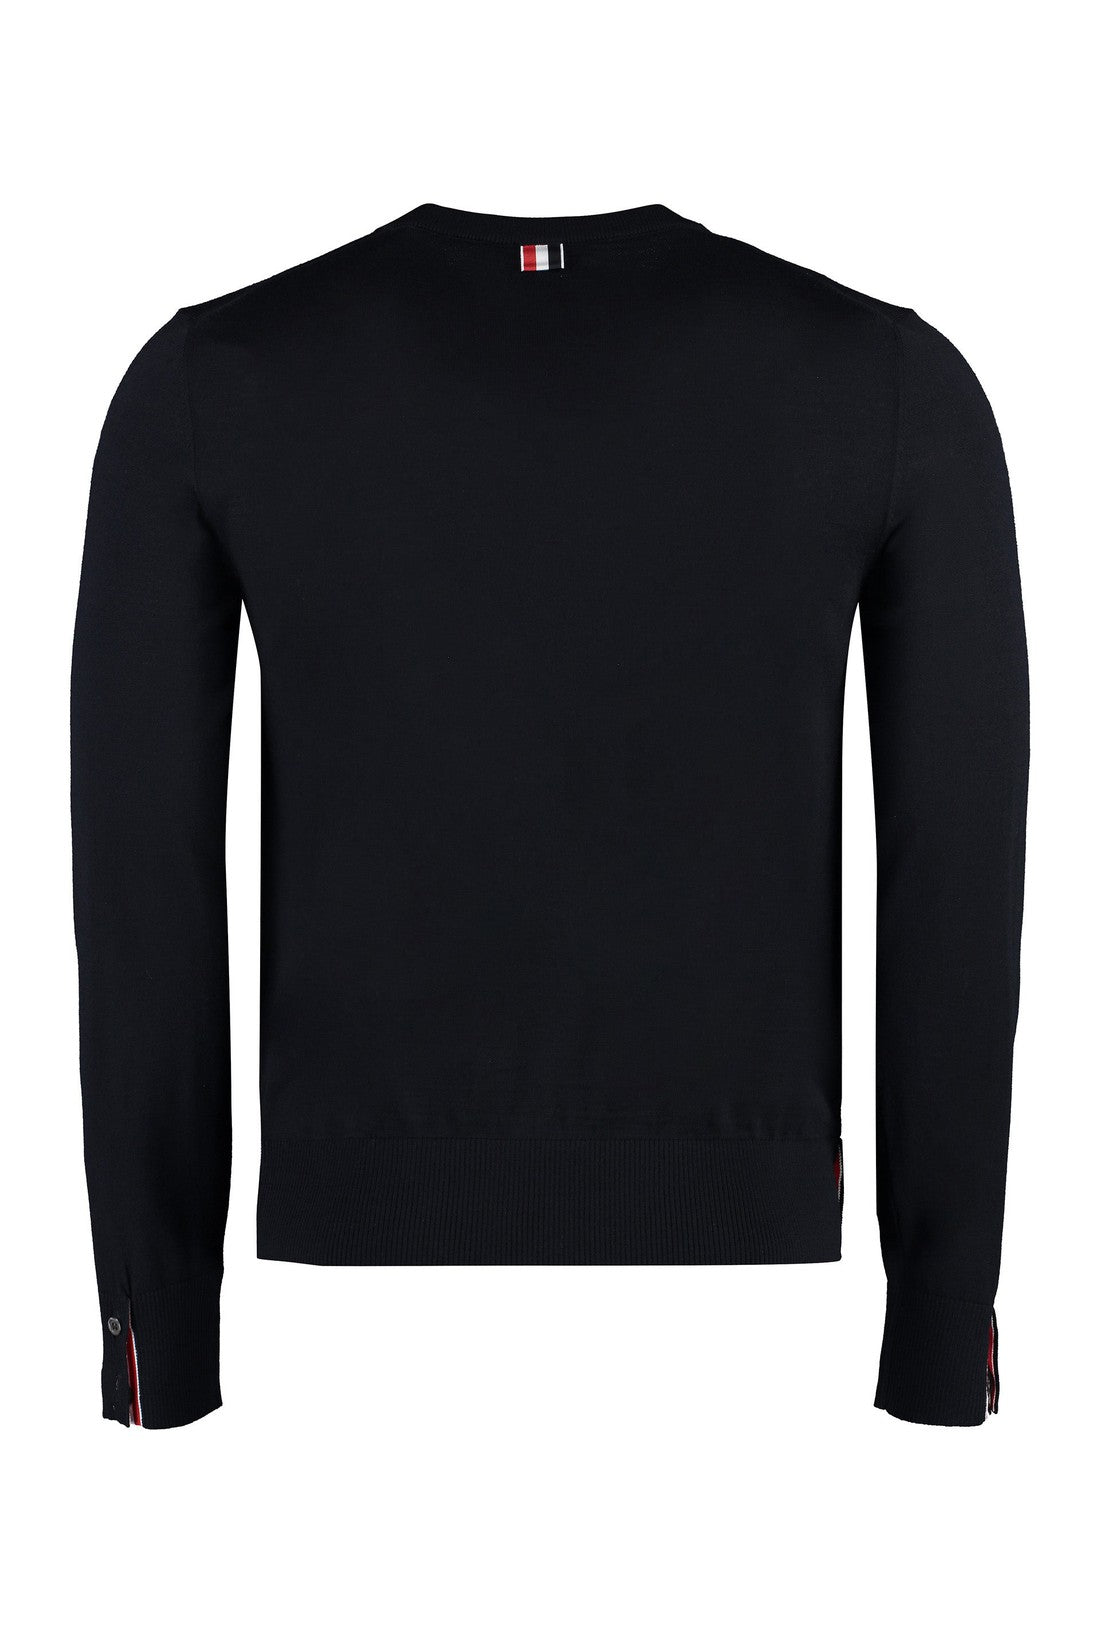 Thom Browne-OUTLET-SALE-Virgin wool crew-neck sweater-ARCHIVIST